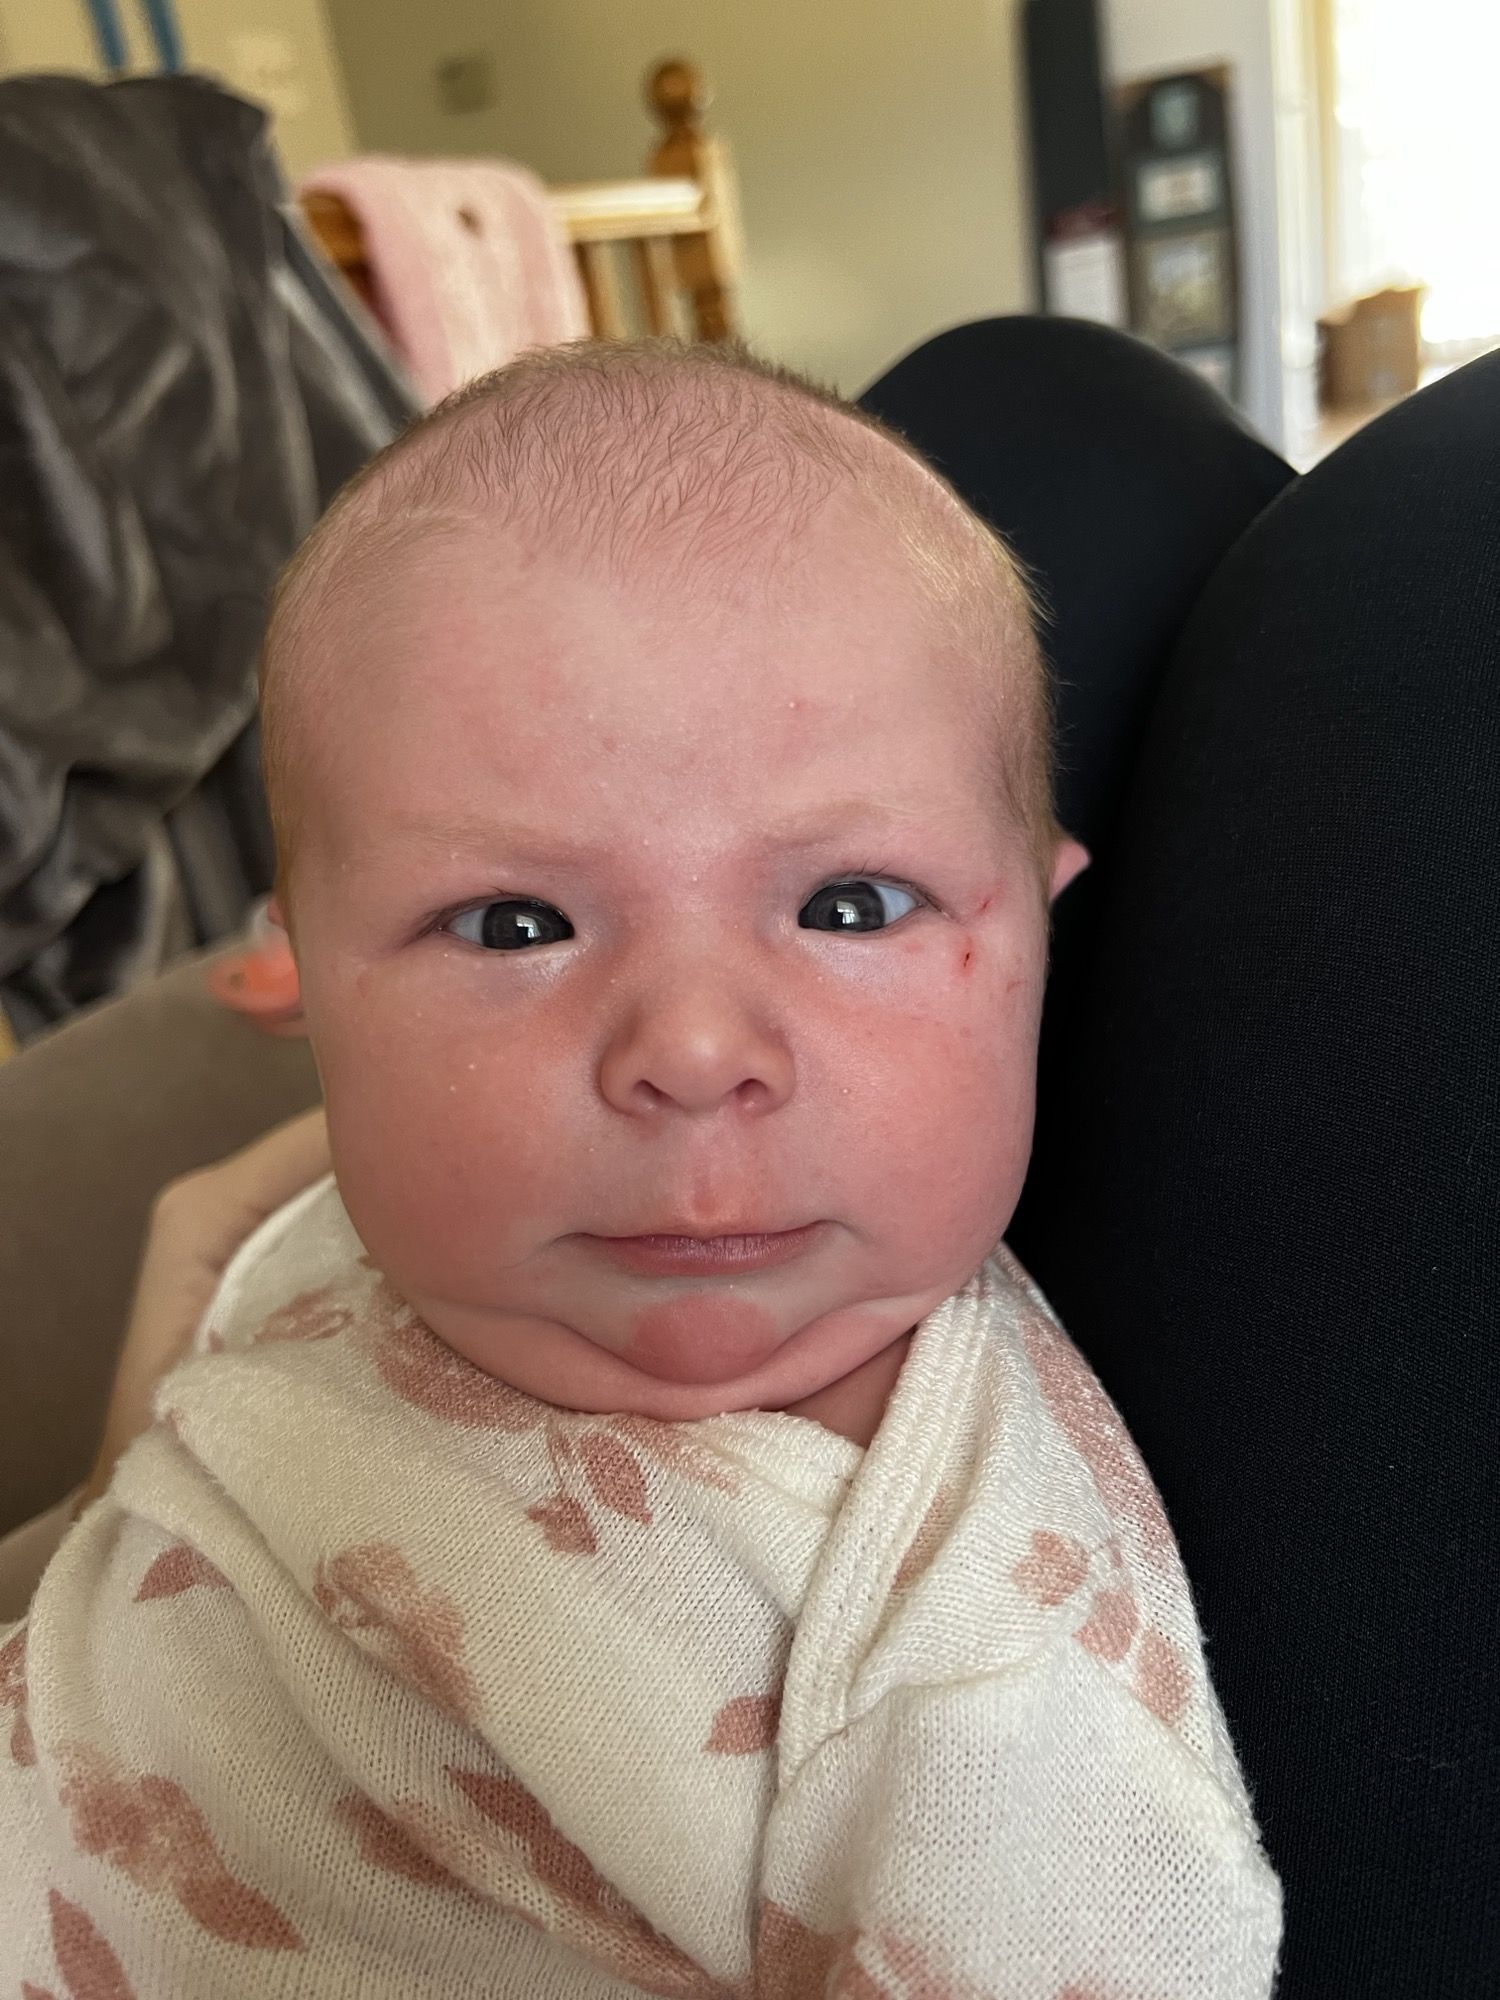 2 weeks old and my granddaughter is already judging me.